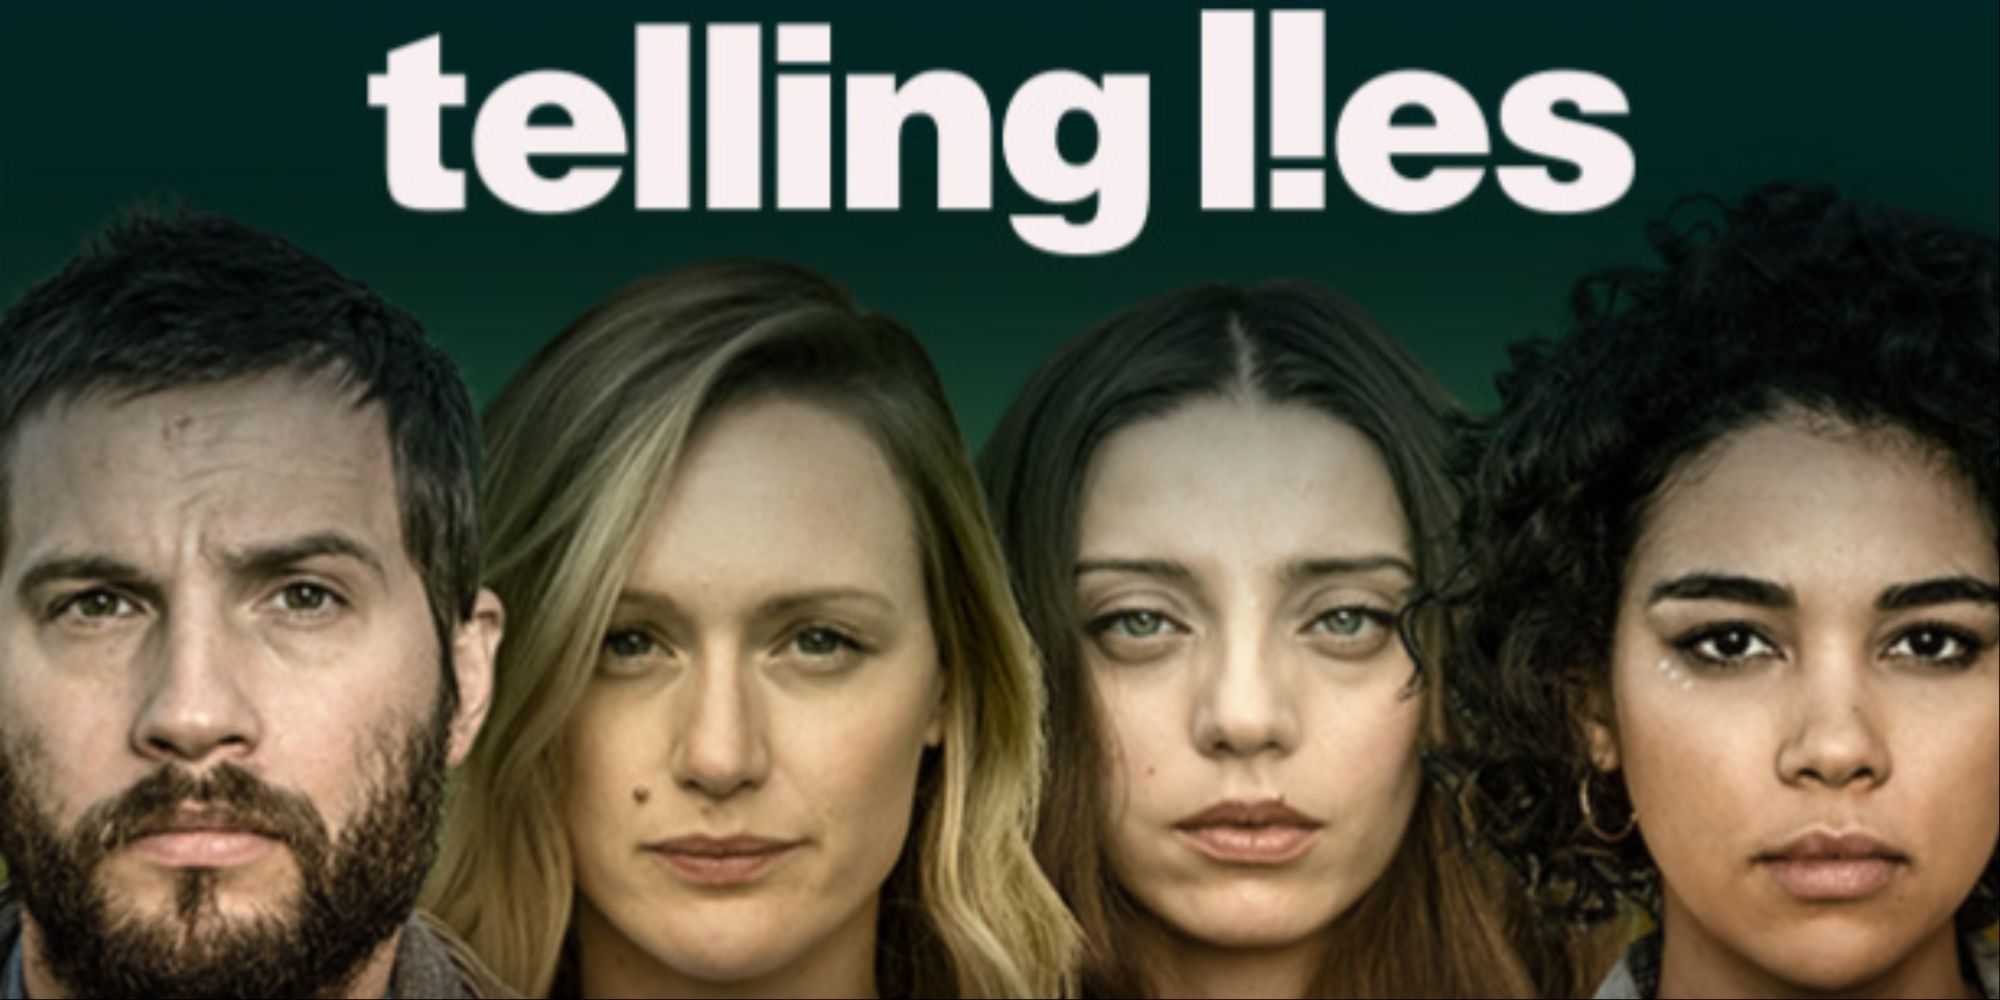 The cover art for Telling Lies with the main characters, featuring actors Logan Marshall-Green, Kerry Bishe, Angela Sarafyan, and Alexandra Shipp,